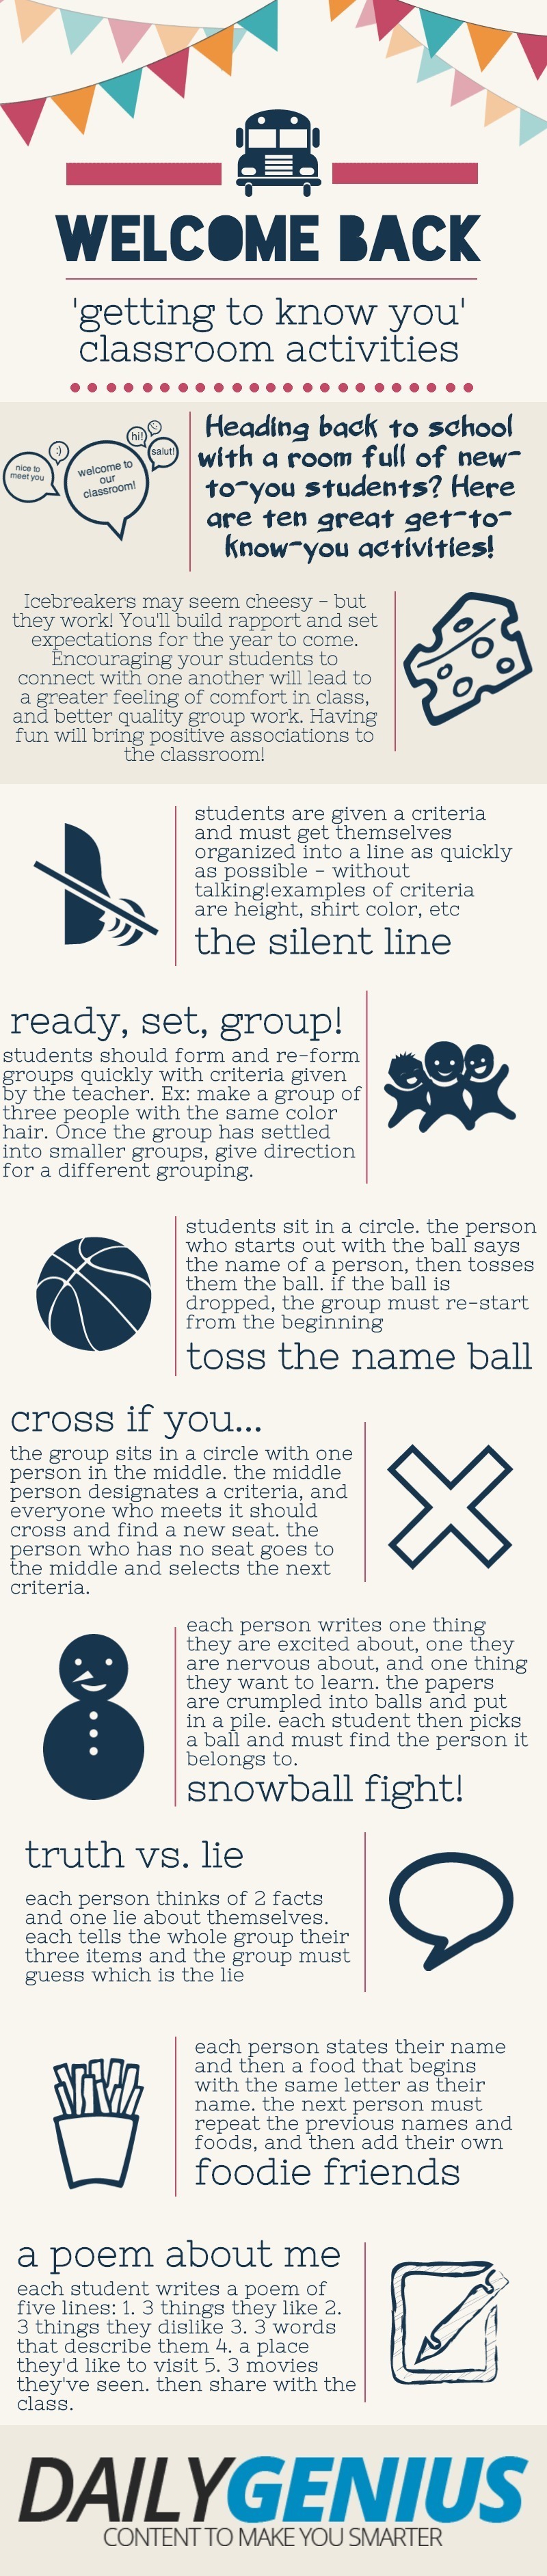 8 Back to School Activities To Get To Know Your Students Infographic